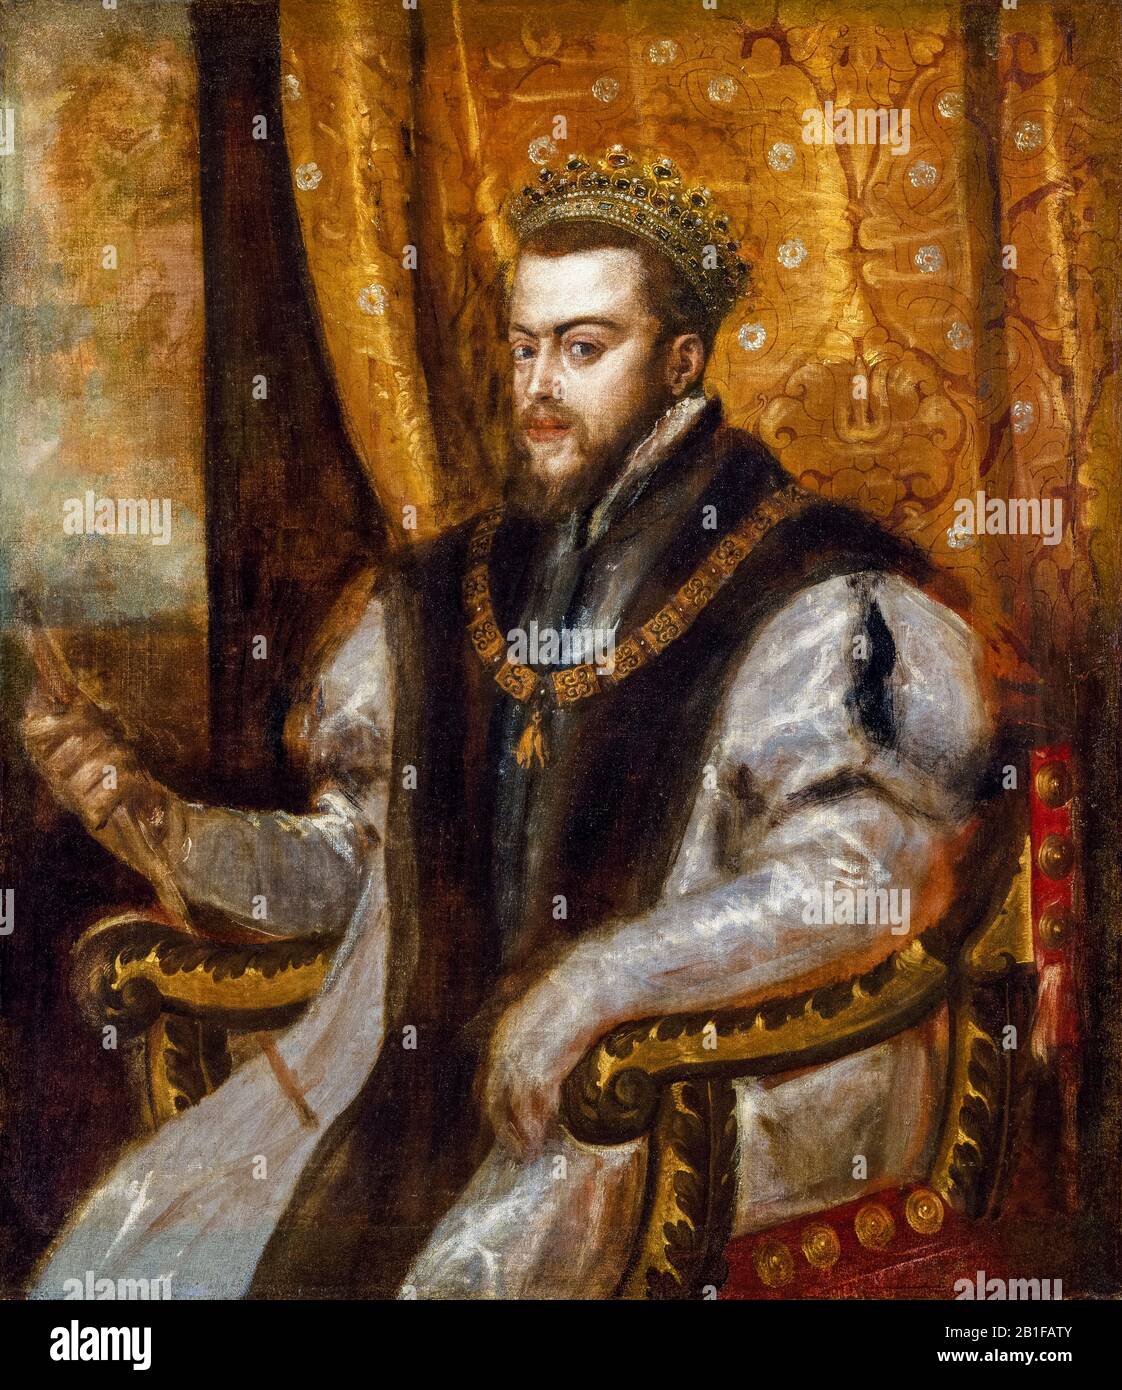 King Philip II of Spain (1527-1598), portrait painting by Titian, 1545-1556 Stock Photo